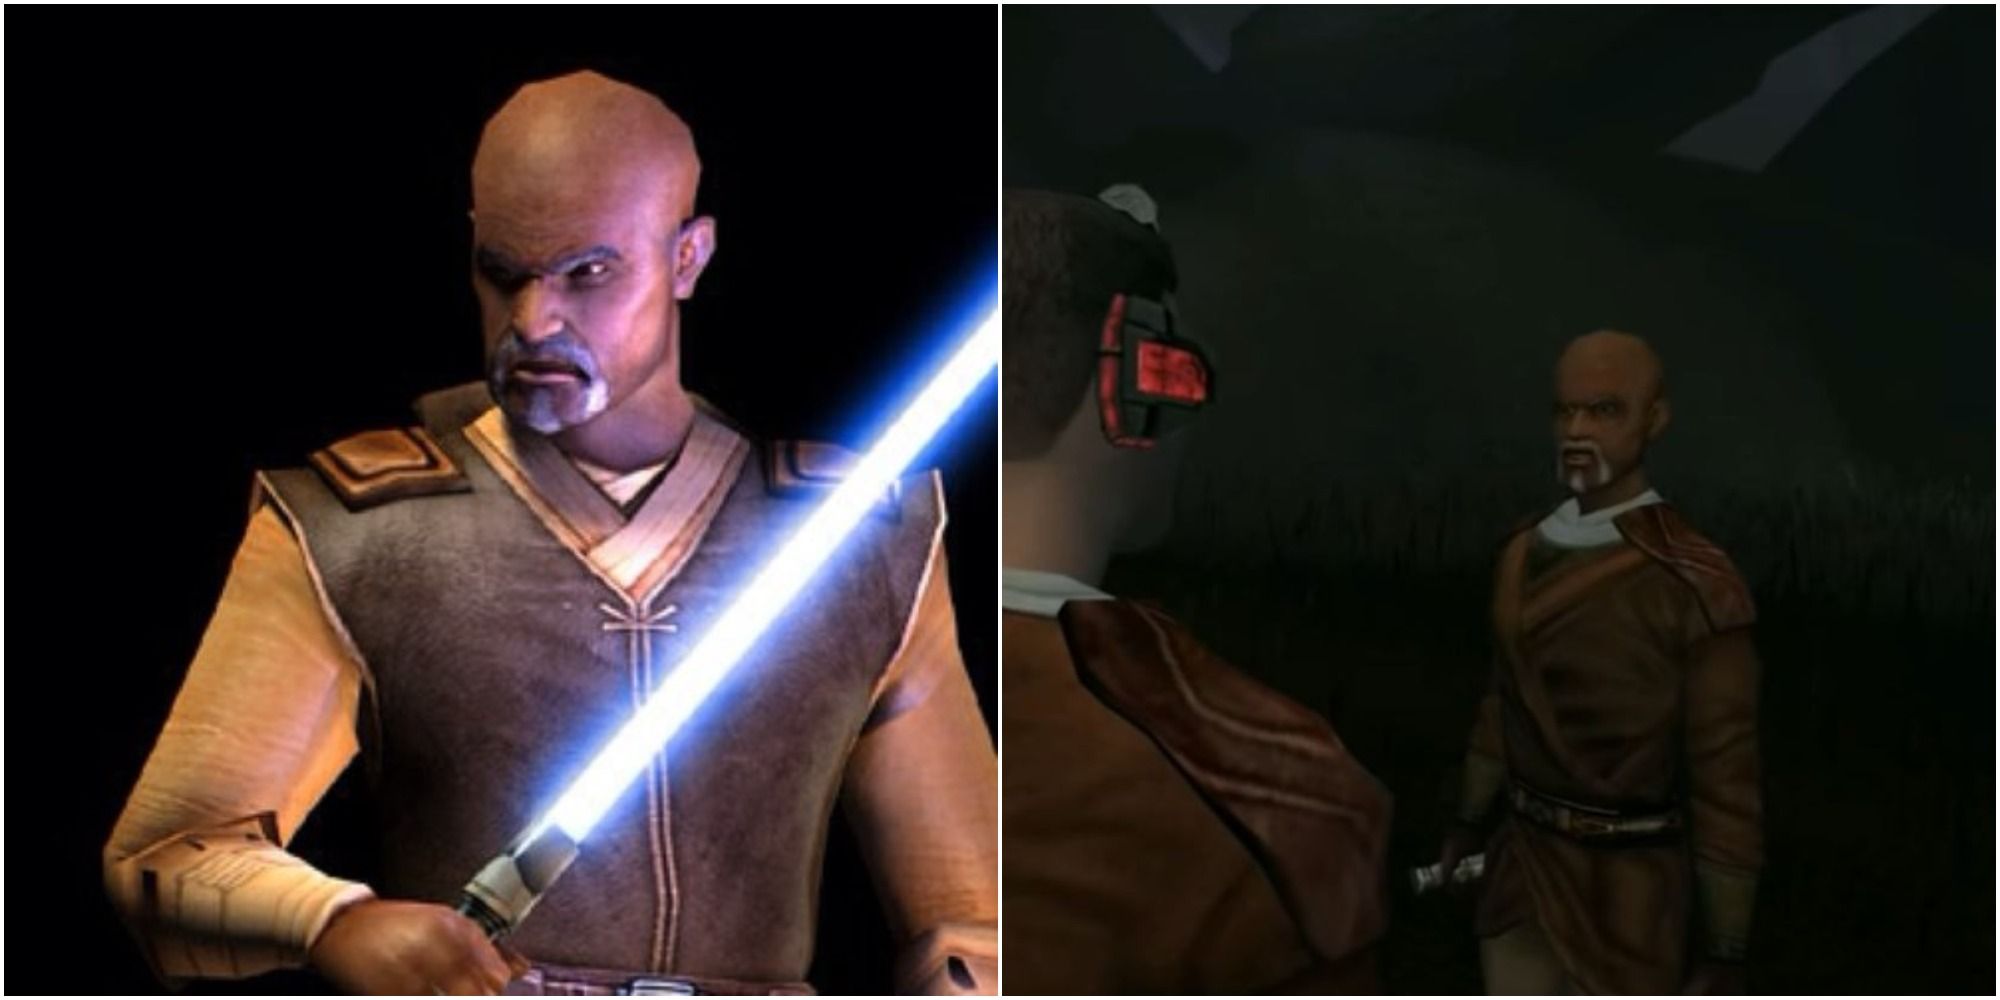 Jolee Bindo holding his blue lightsaber on the left while he angrily addresses Revan on Kashyyyk to the right.